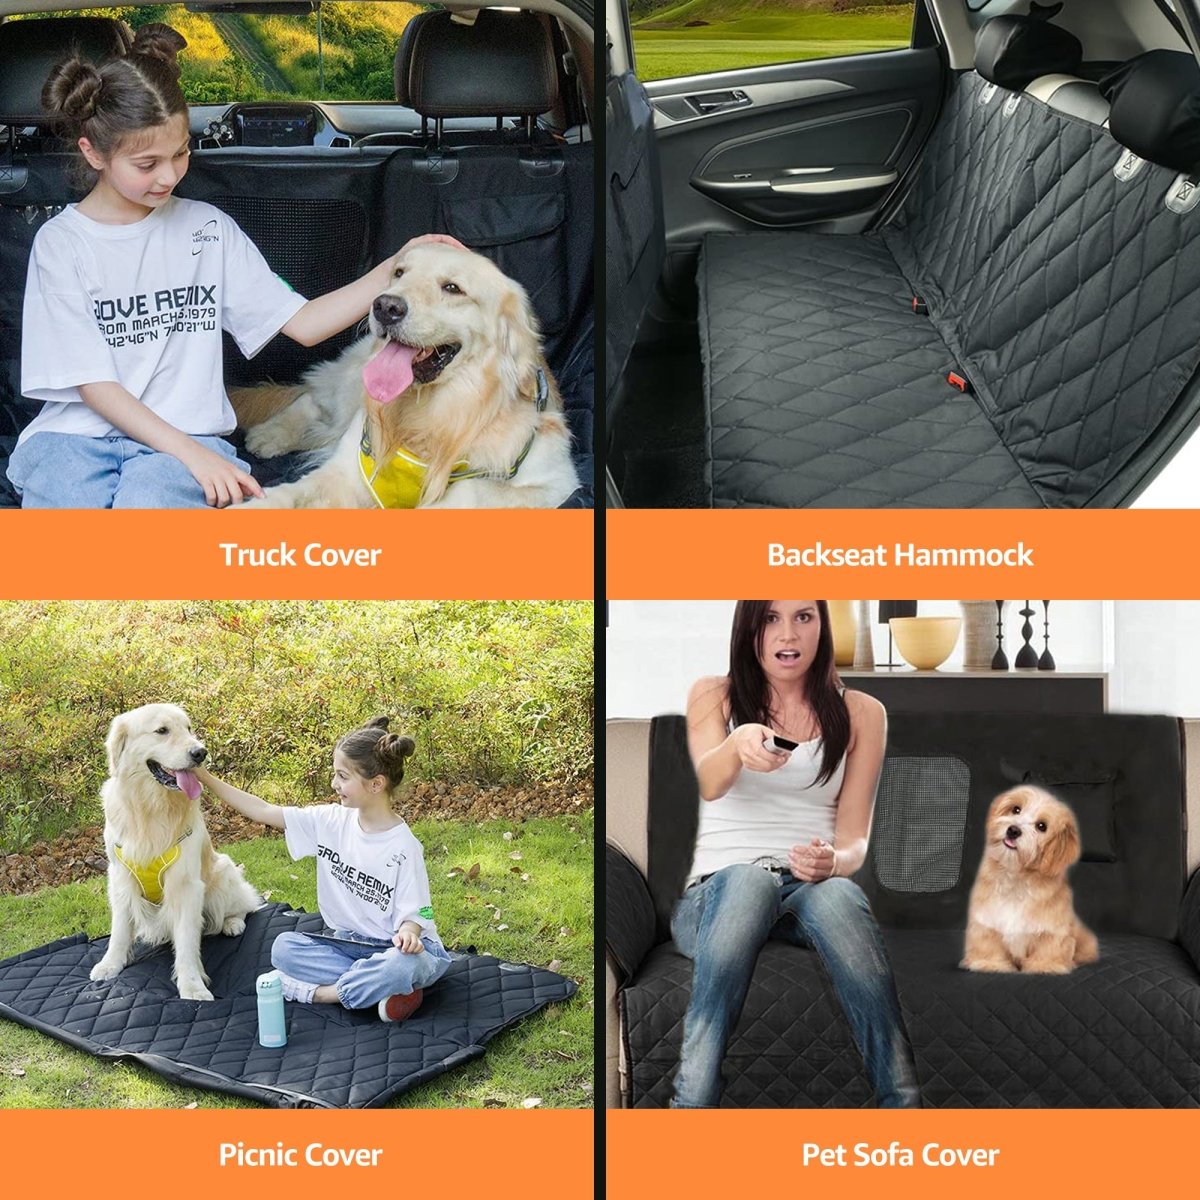 Dog Seat Cover, Car Rear Seat Protector for Dogs with Mesh Viewing Window &  Storage Pocket, Non-Scratch Nonslip Back Seat Cover for Cars SUVs Trucks 